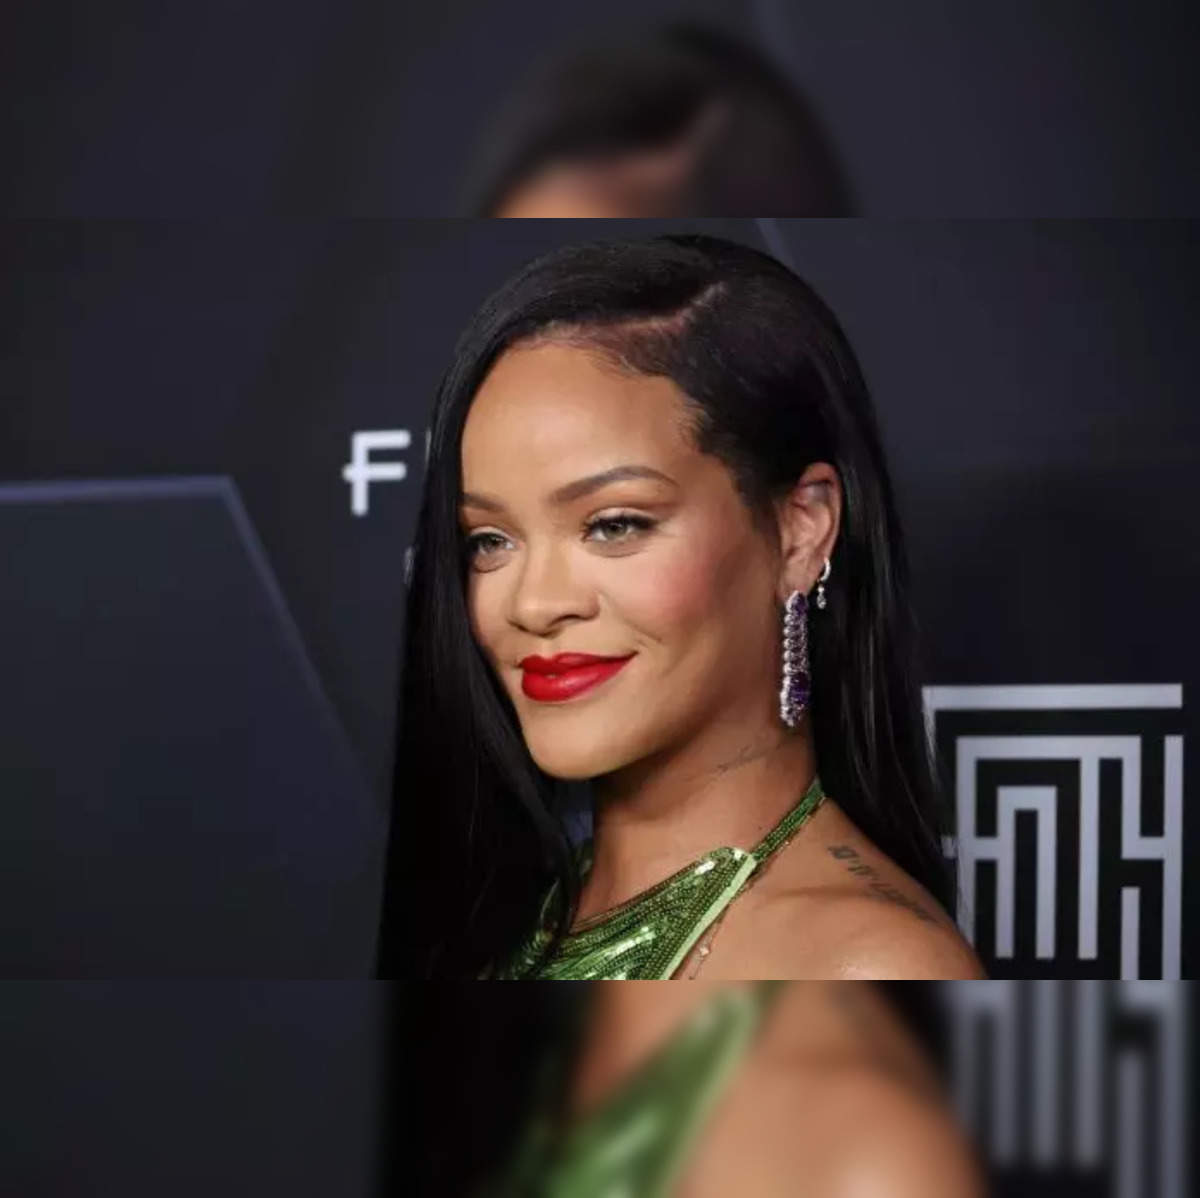 Rihanna pays tribute to musician SOPHIE following her death